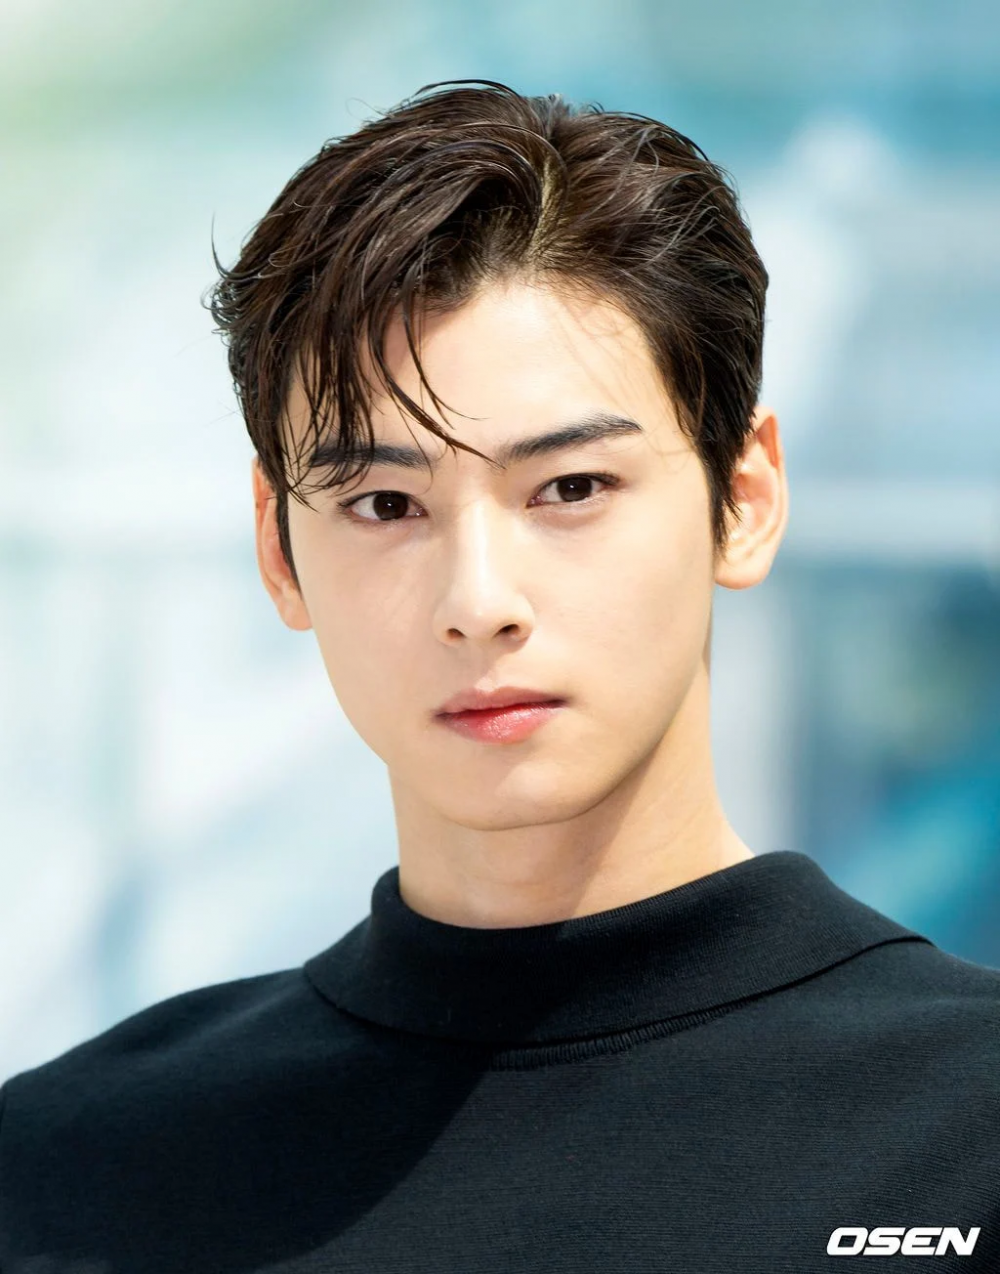 Cha Eun Woo, Sehun, and Park Solomon exude their handsomeness at the DIOR  event